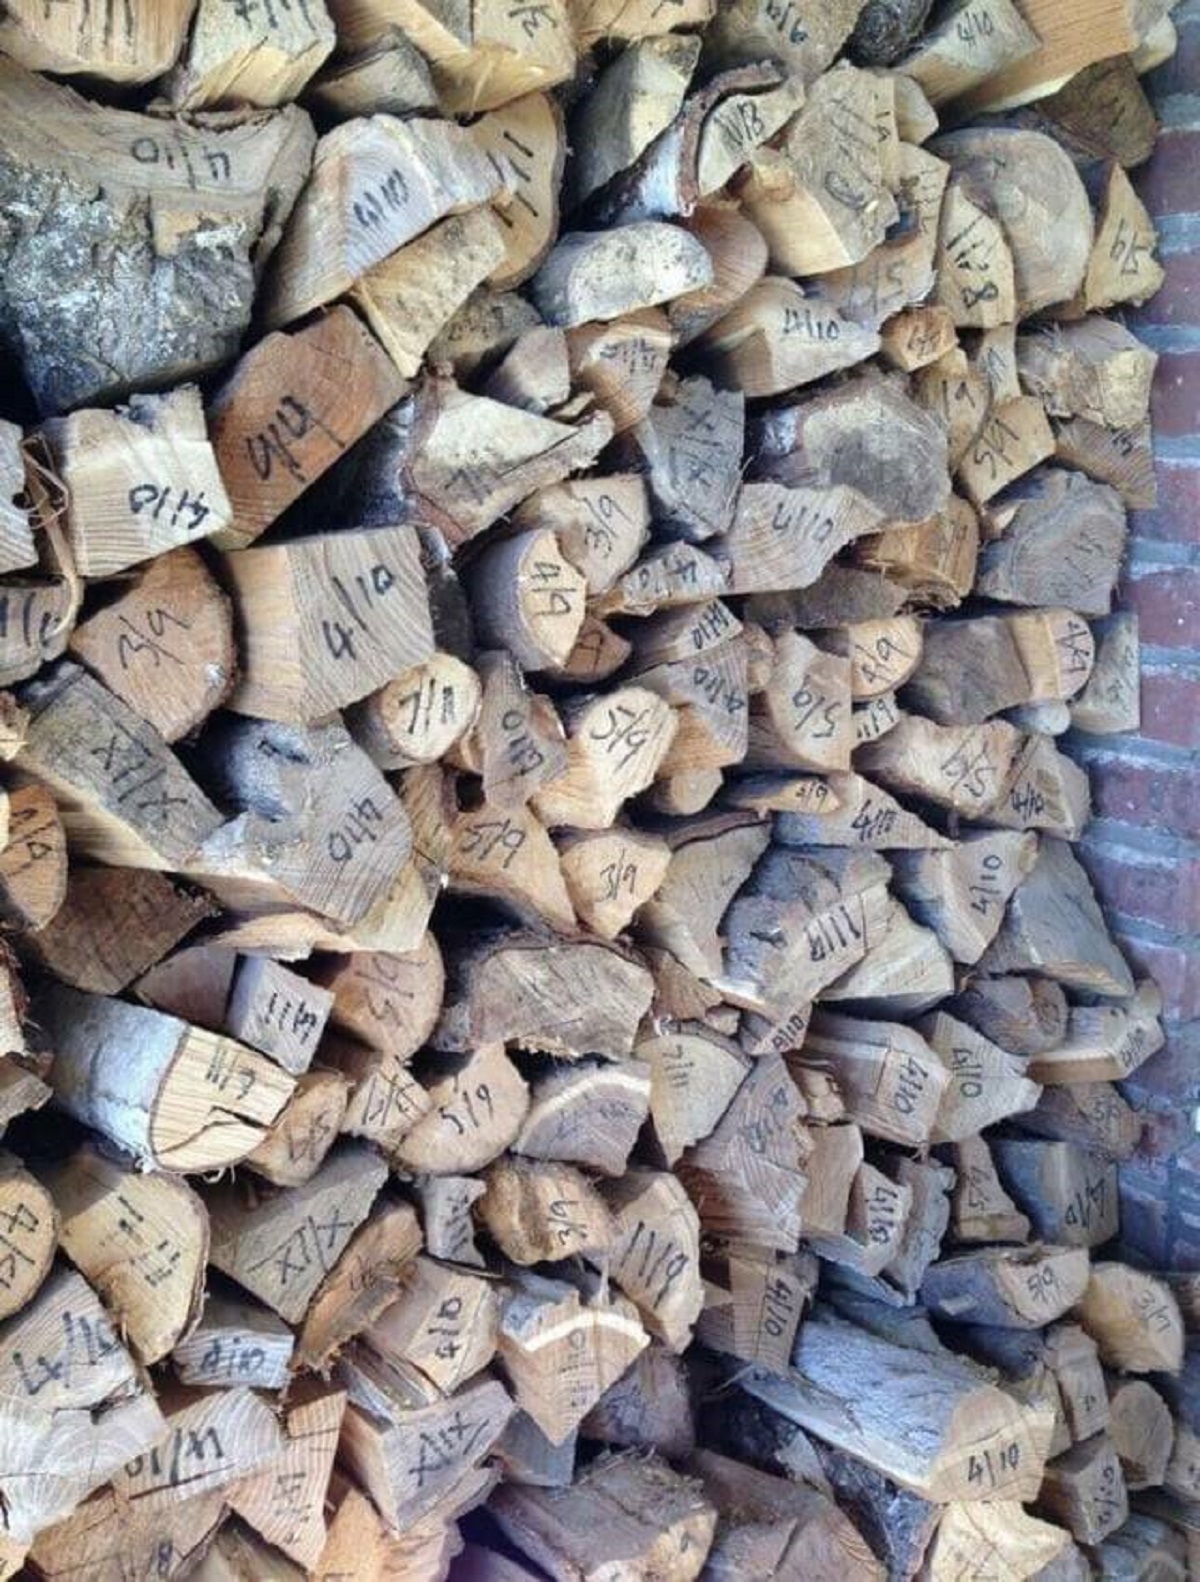 "A Customer I Am Working For Has Dated All Their Logs."